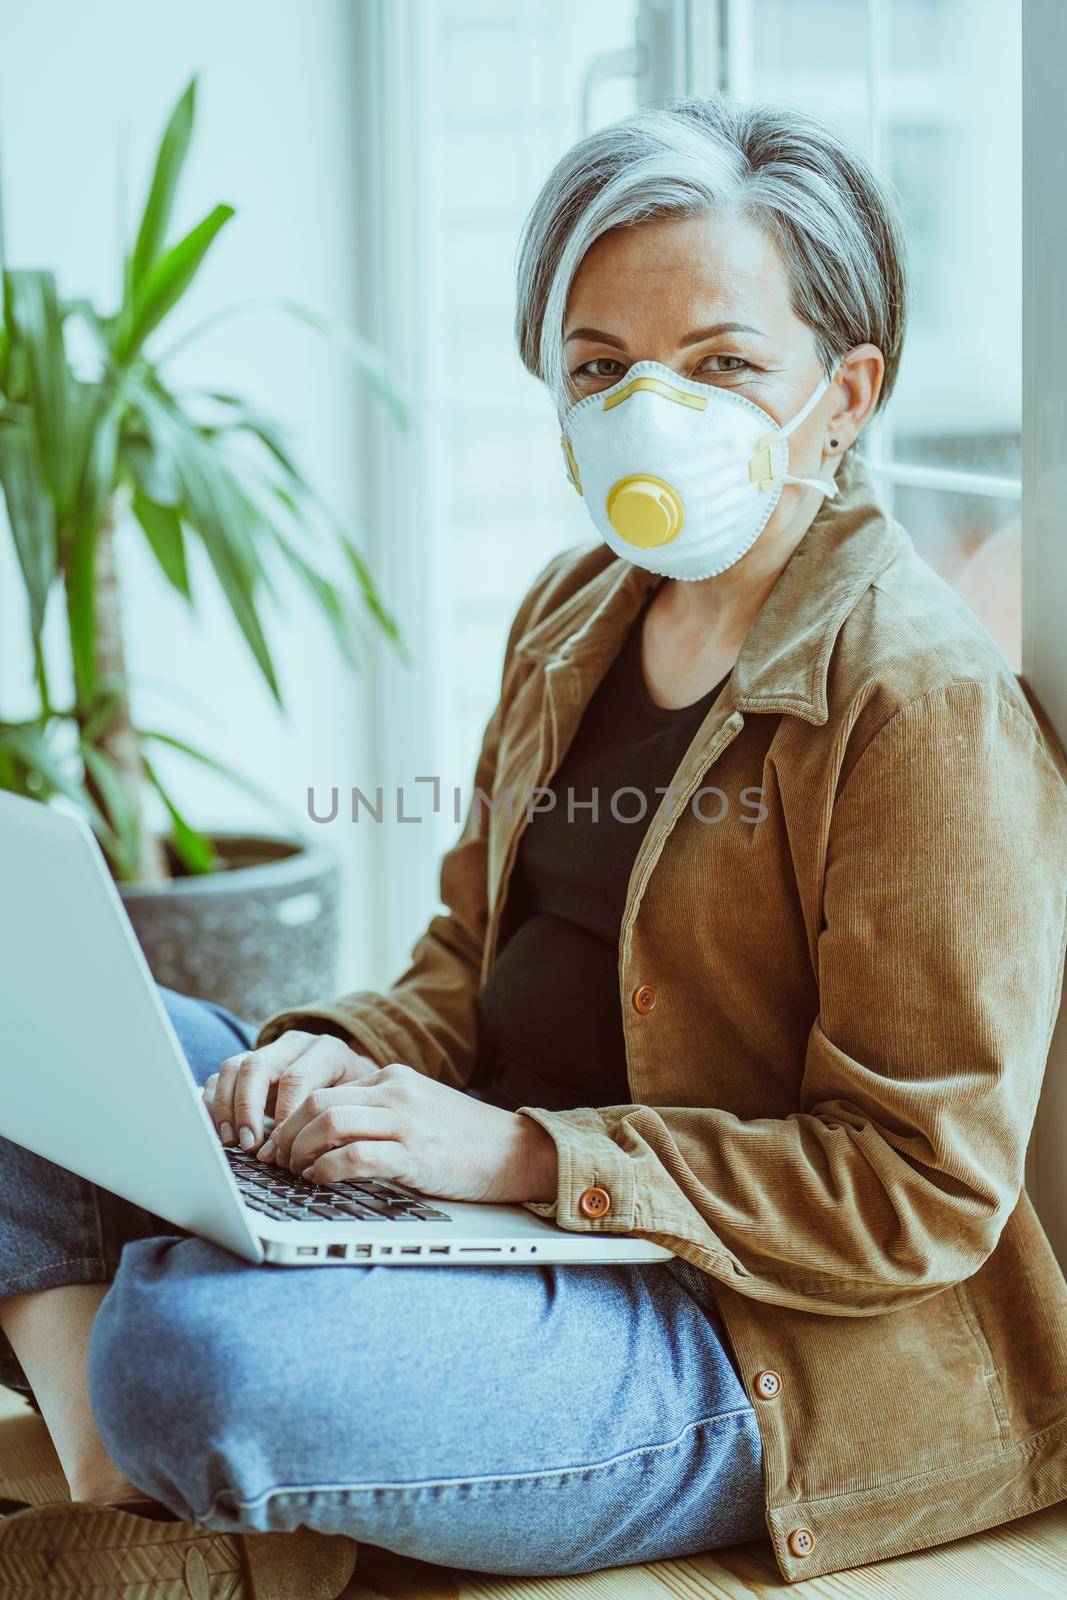 Masked aged woman looks camera using laptop while sitting crossed legs on windowsill. Pandemic concept.